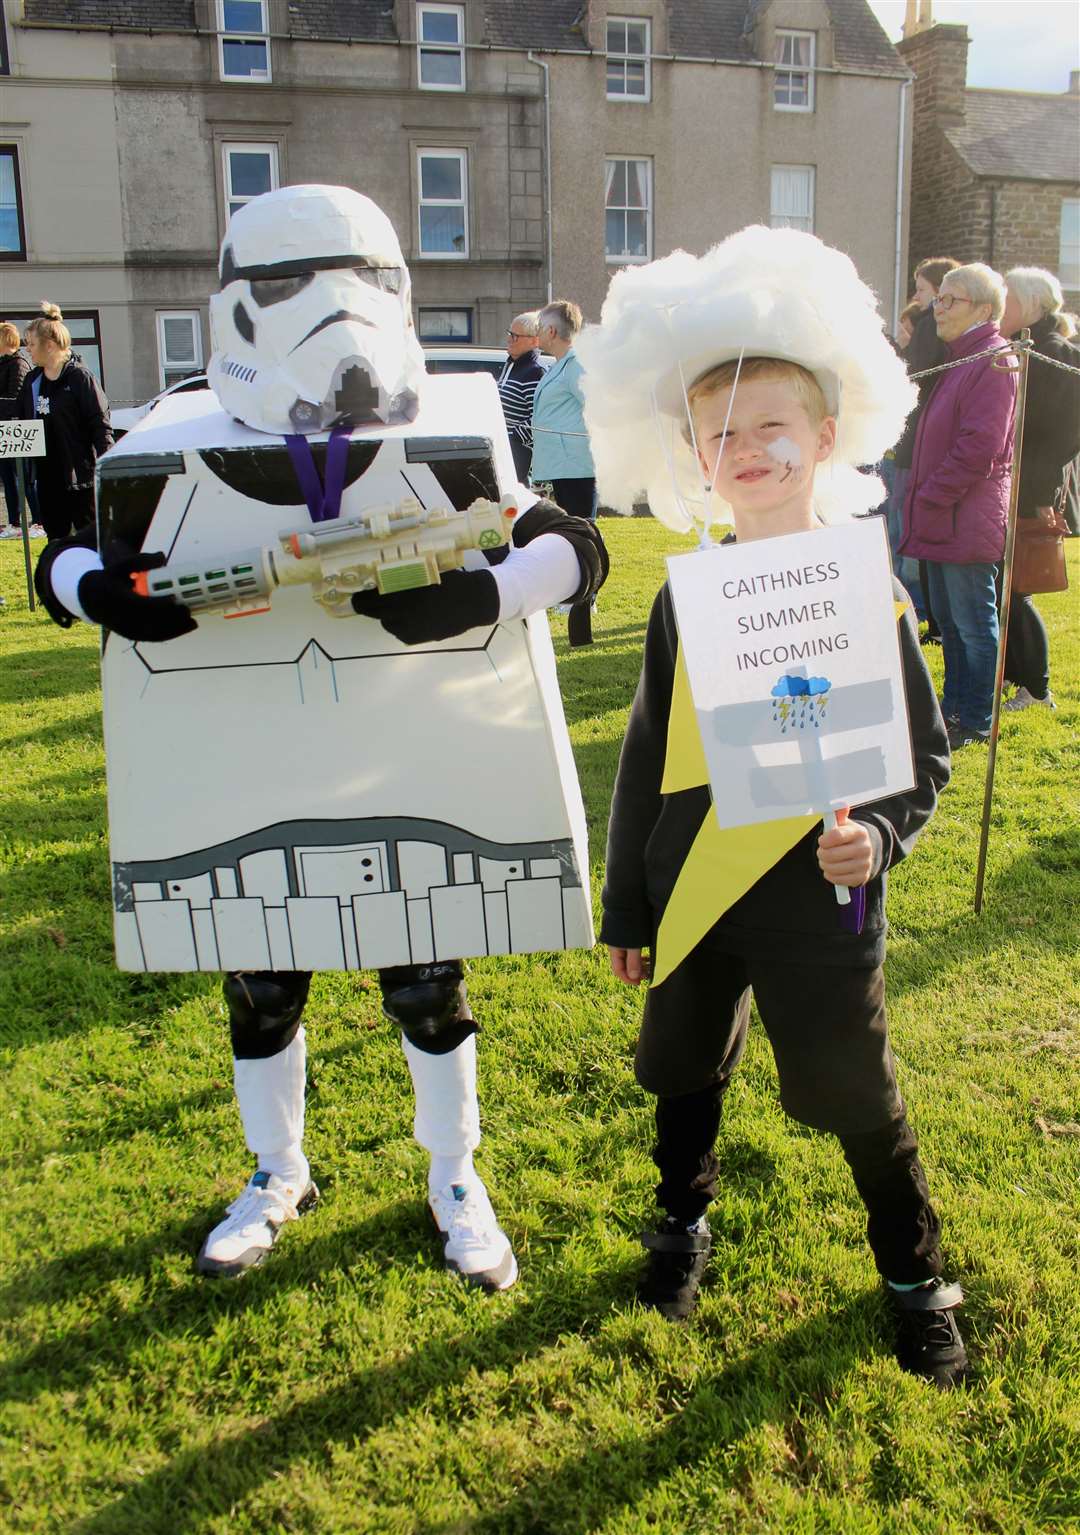 Lego Stormtrooper Caalin Rosie (9) with Myles Oliphant (8), who was dressed as a thunder cloud to represent Wick's unpredictable weather. Picture: Alan Hendry